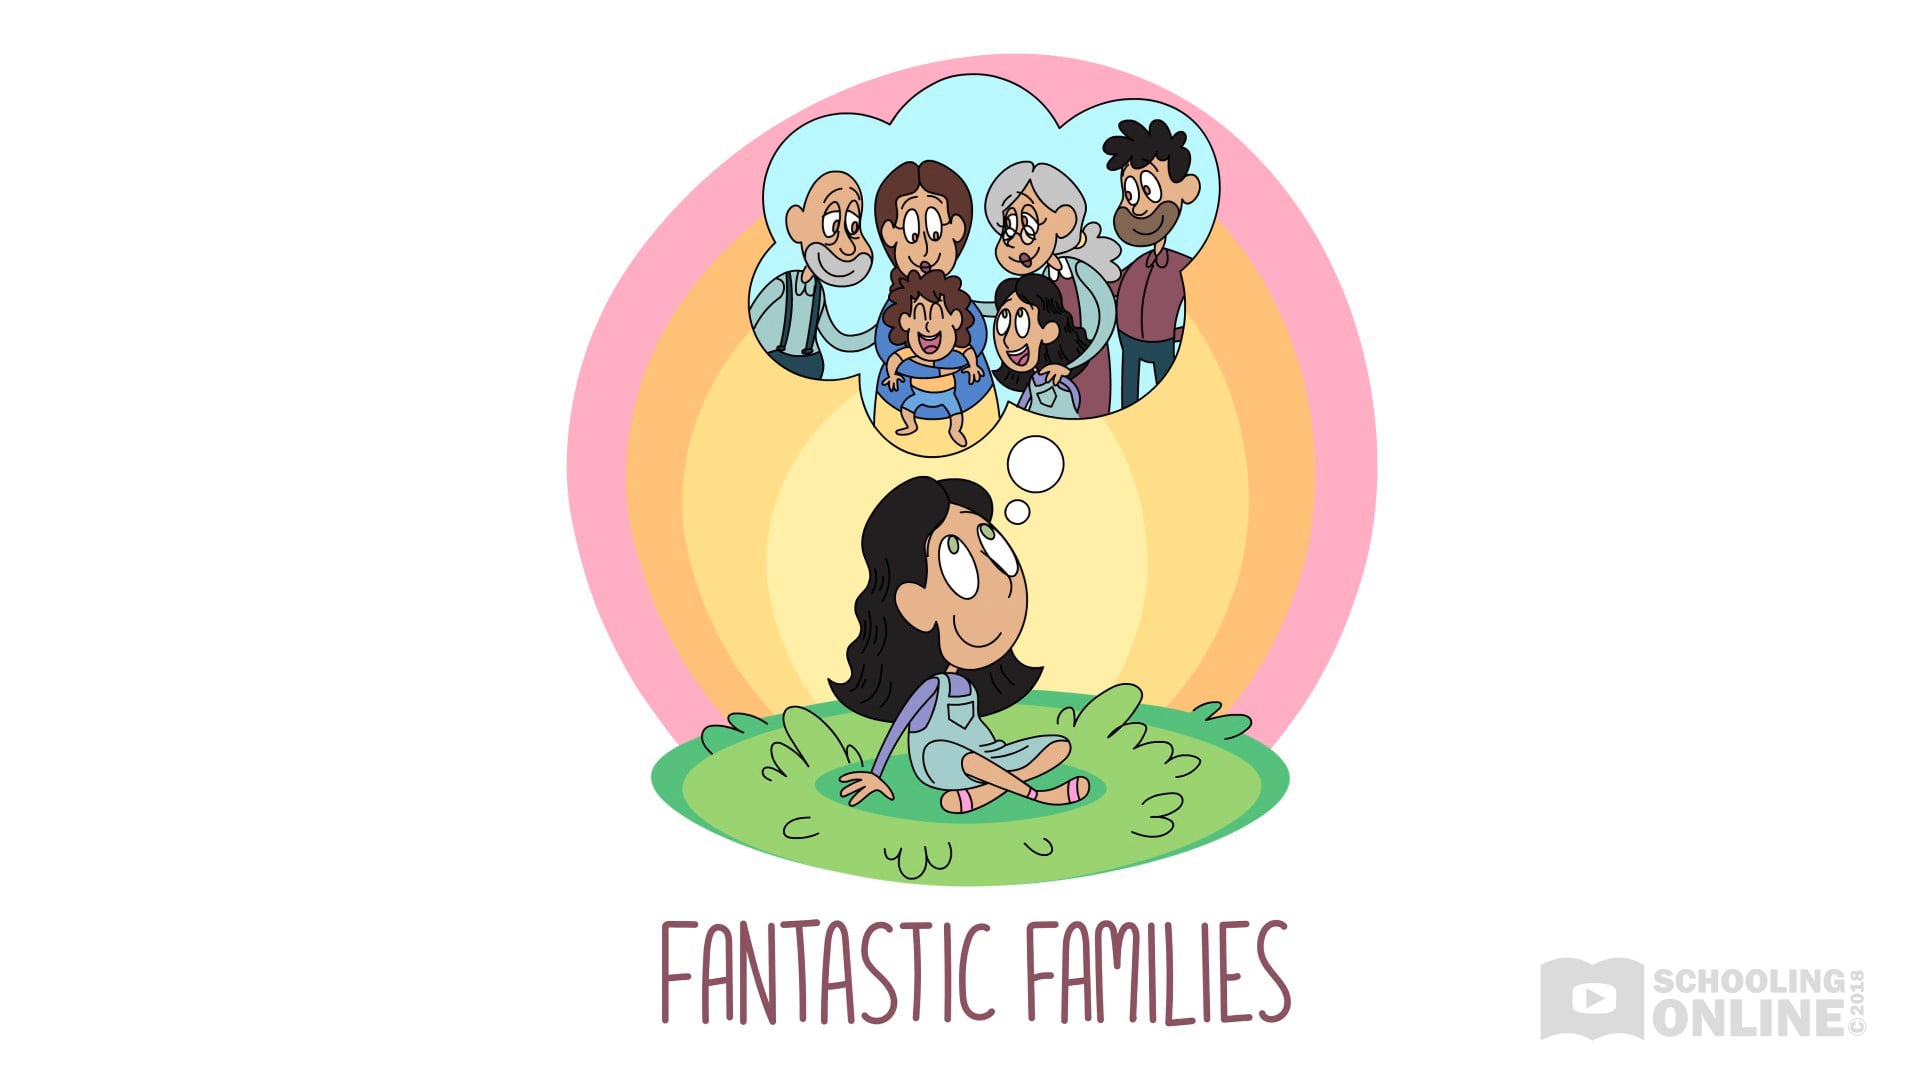 Personal Family Histories 2 - Fantastic Families